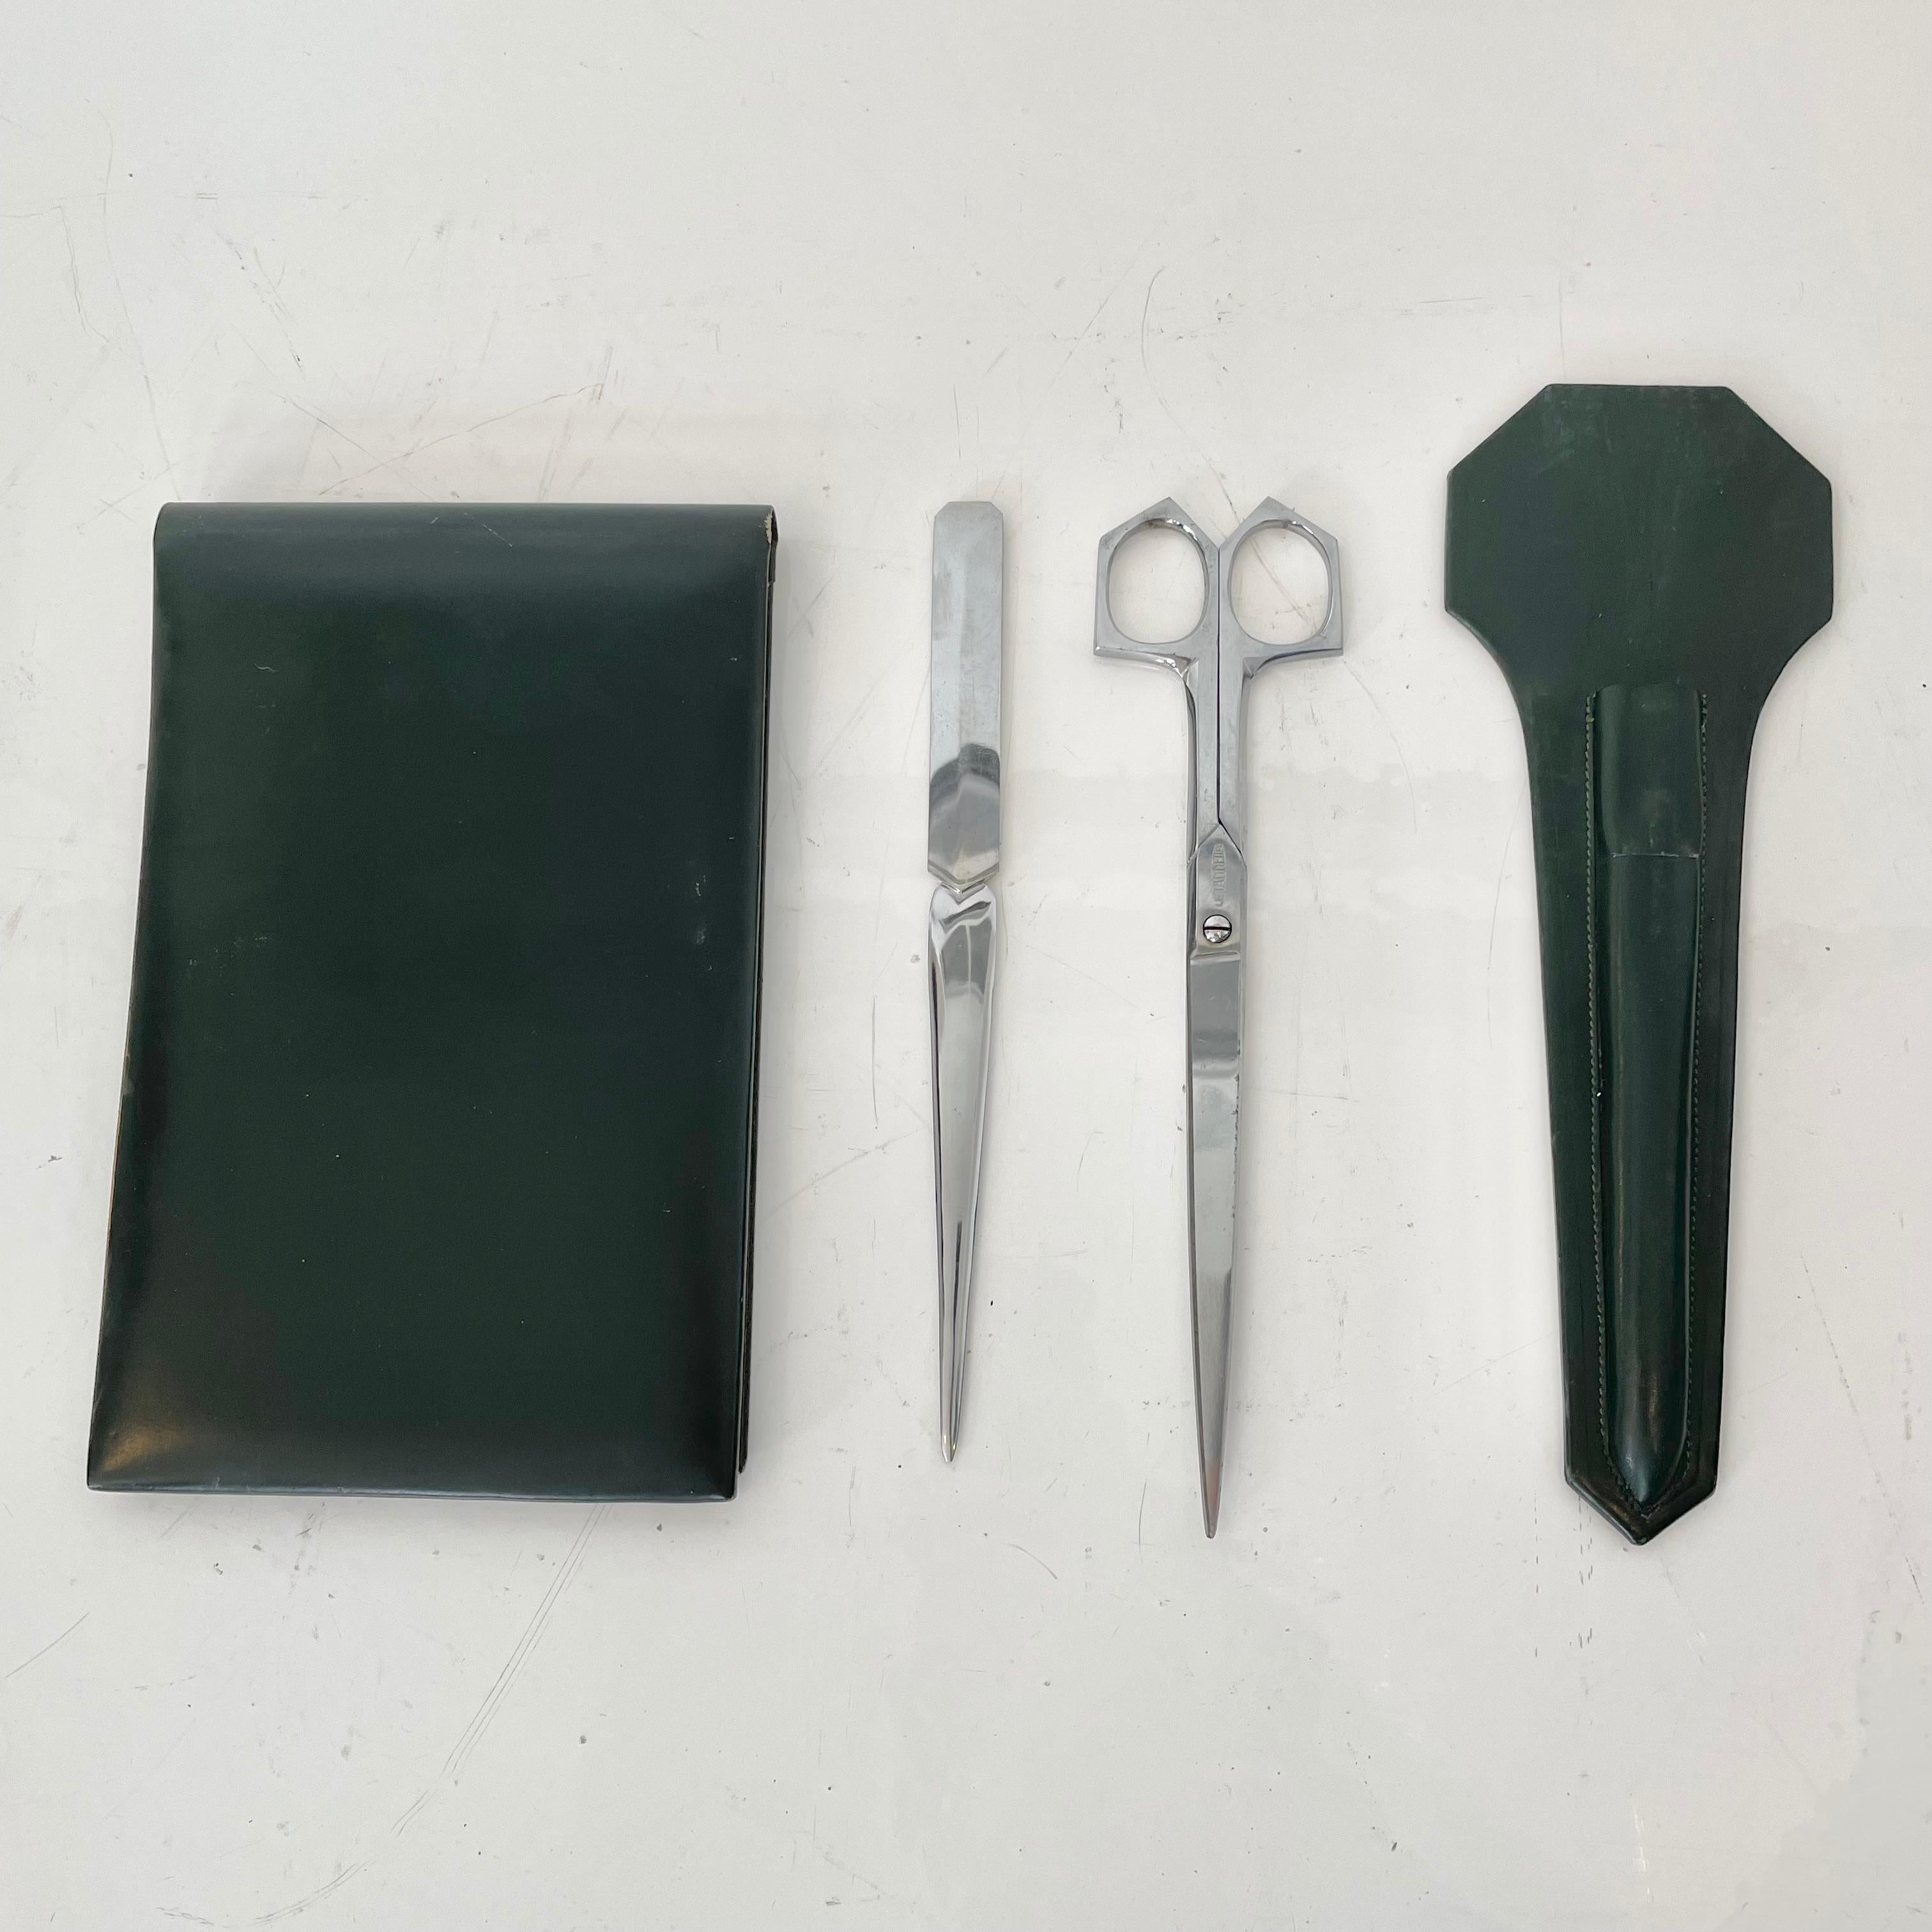 Fantastic 3-piece French leather desk set by Le Tanneur. All pieces wrapped in dark green leather. Desk set includes: note pad, letter opener, scissors. Letter opener and scissors fit snuggly in a carrying case. Good vintage condition. Super elegant